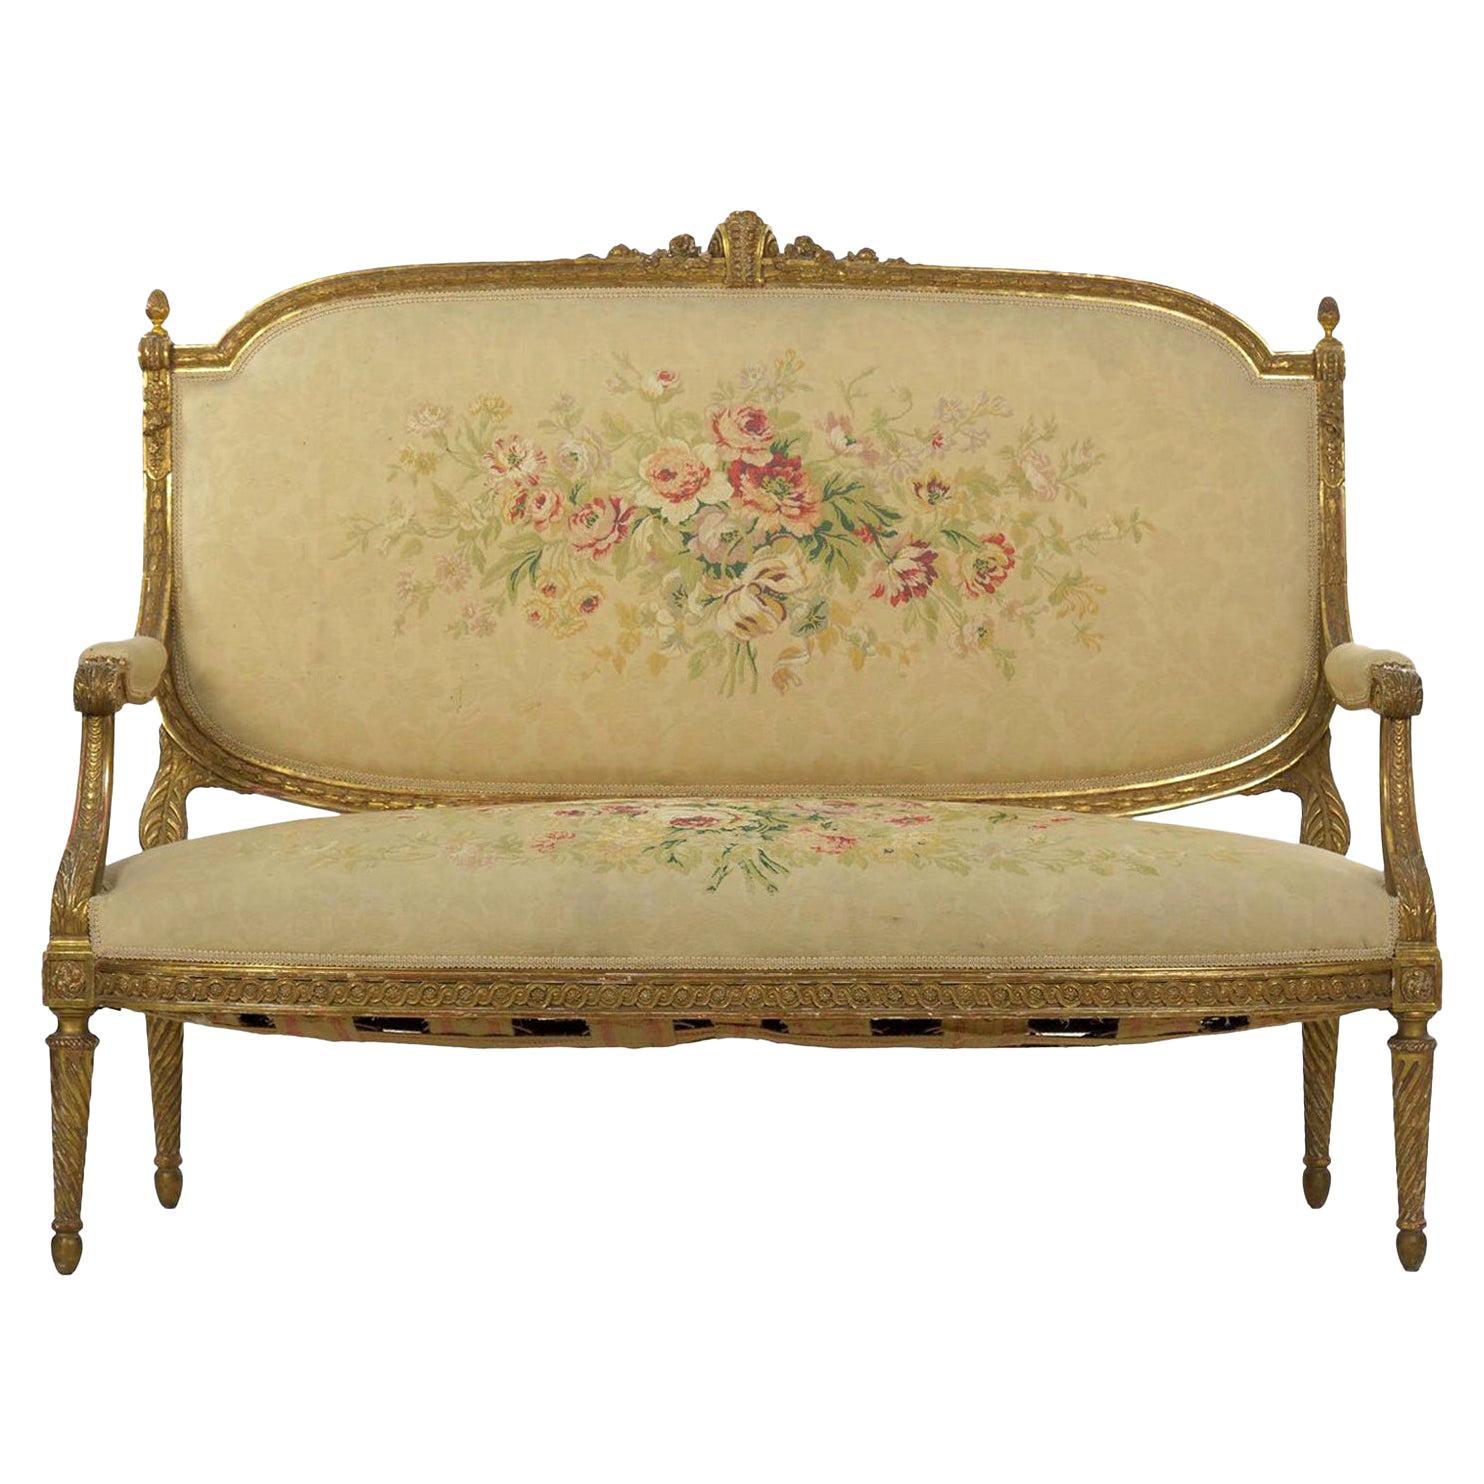 French Louis XVI Style Carved Giltwood Antique Settee Loveseat Sofa 20th Century